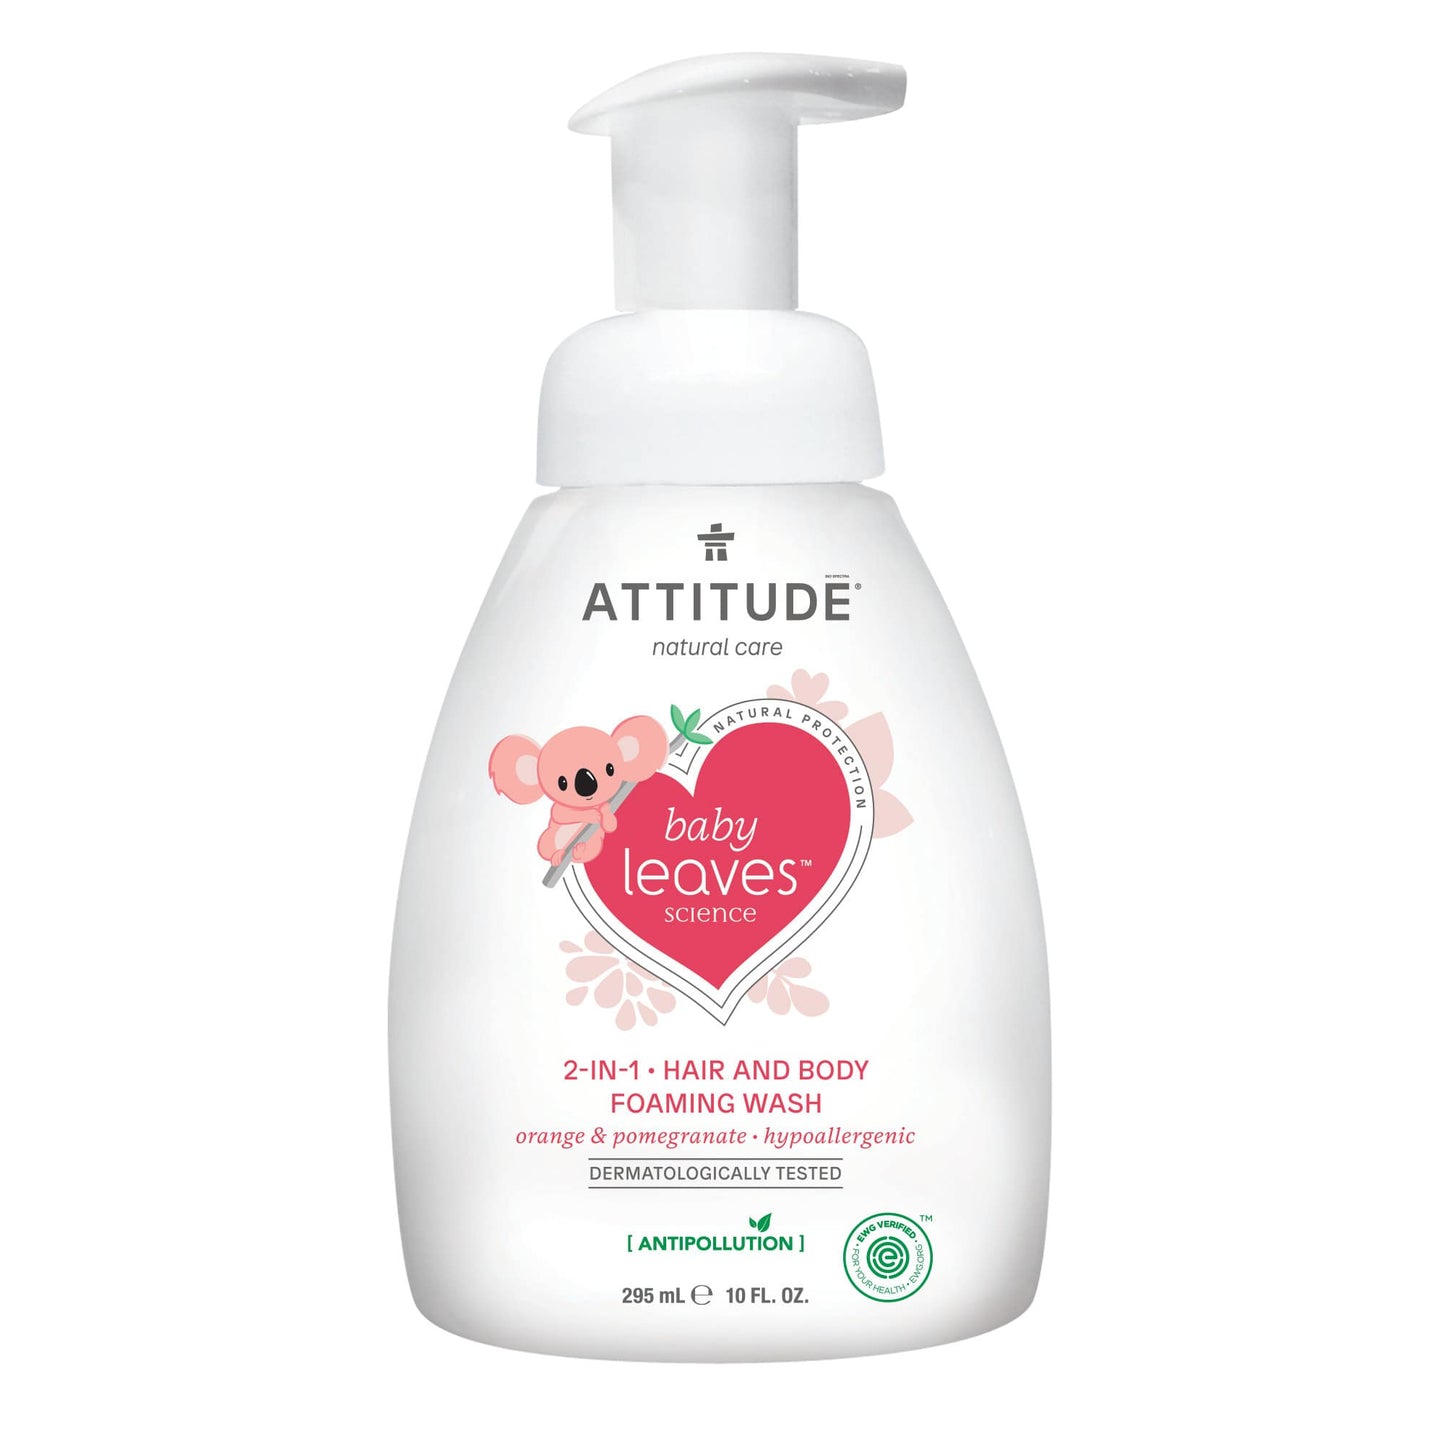 ATTITUDE baby leaves™ 2-in-1 Hair and Body Foaming Wash Orange & pomegranate 16631_en?_main? Orange and Pomegranate